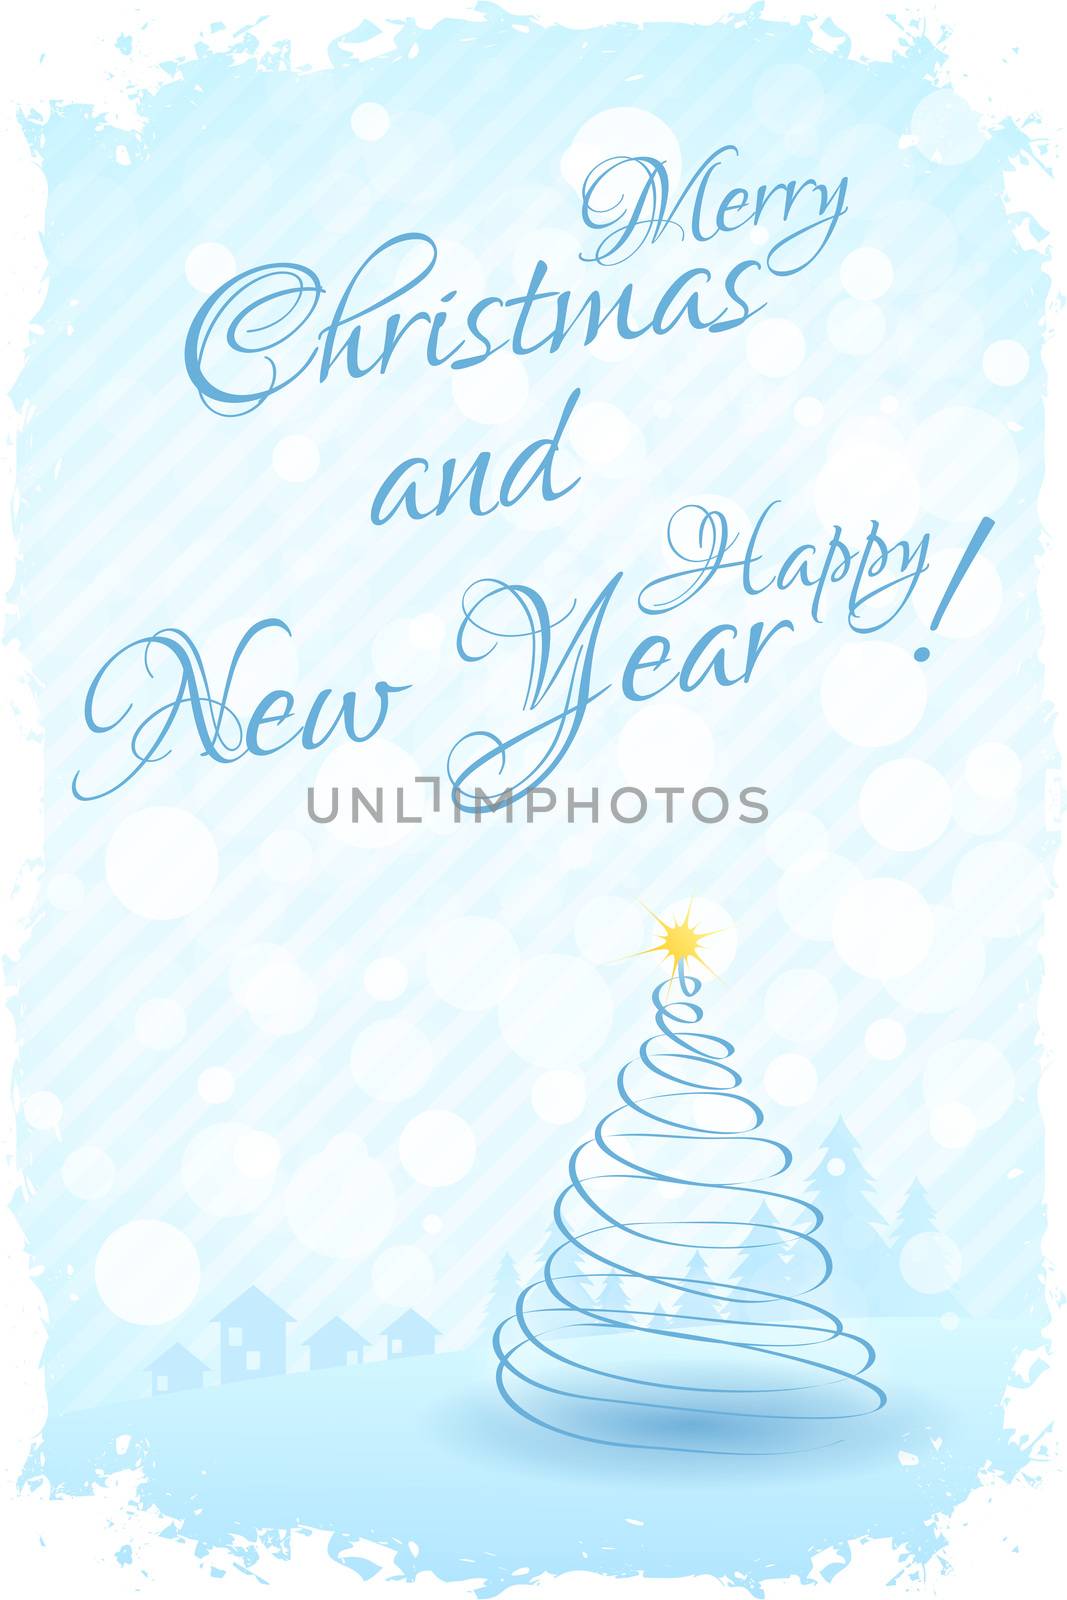 Grungy Happy New Year Card with Christmas Tree